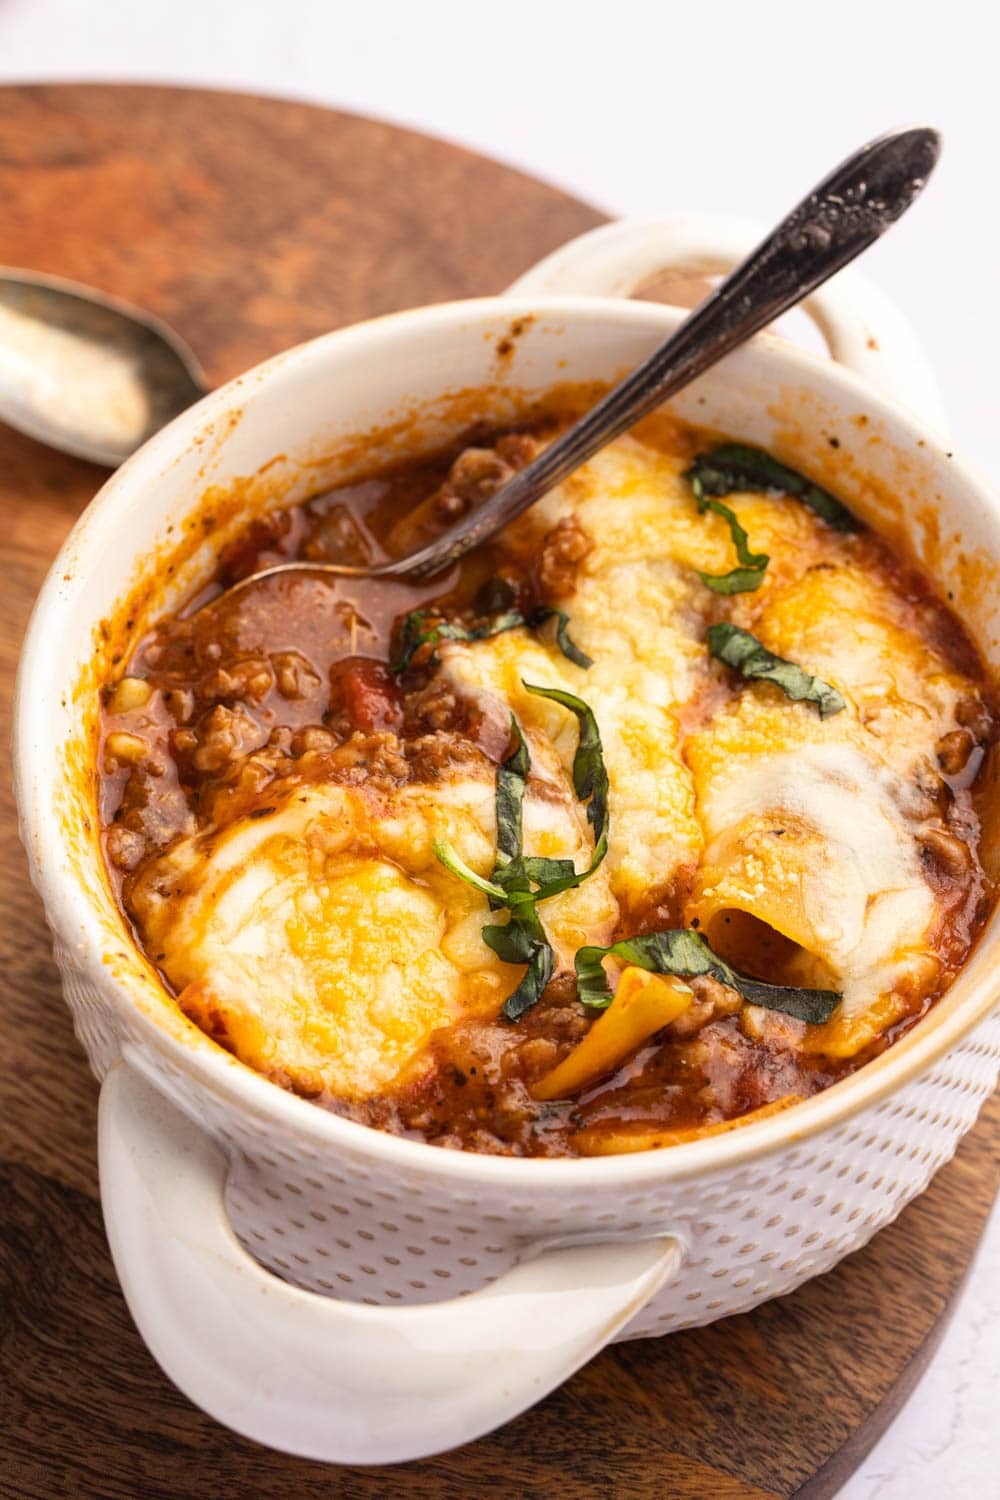 Cheesy Crockpot Lasagna Soup with Onions, Garlic, Tomatoes and Basil Served on a Ceramic Pot